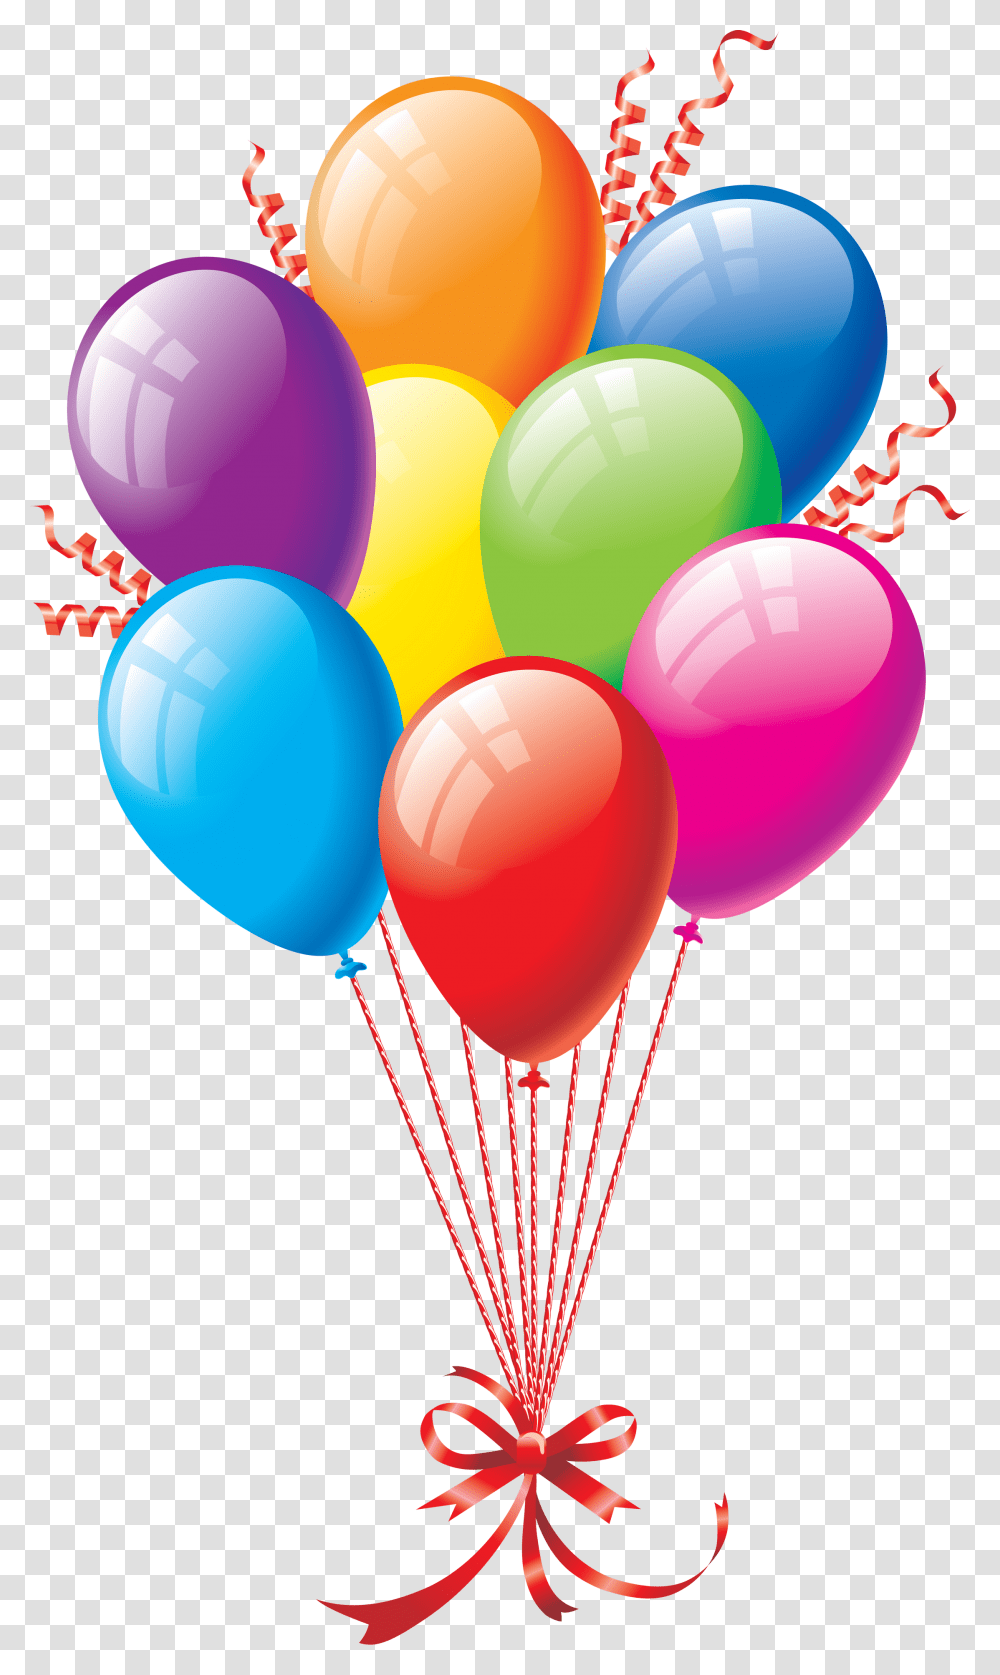 Image Result For Happy Birthday Balloons Clip Art Images Transparent Png